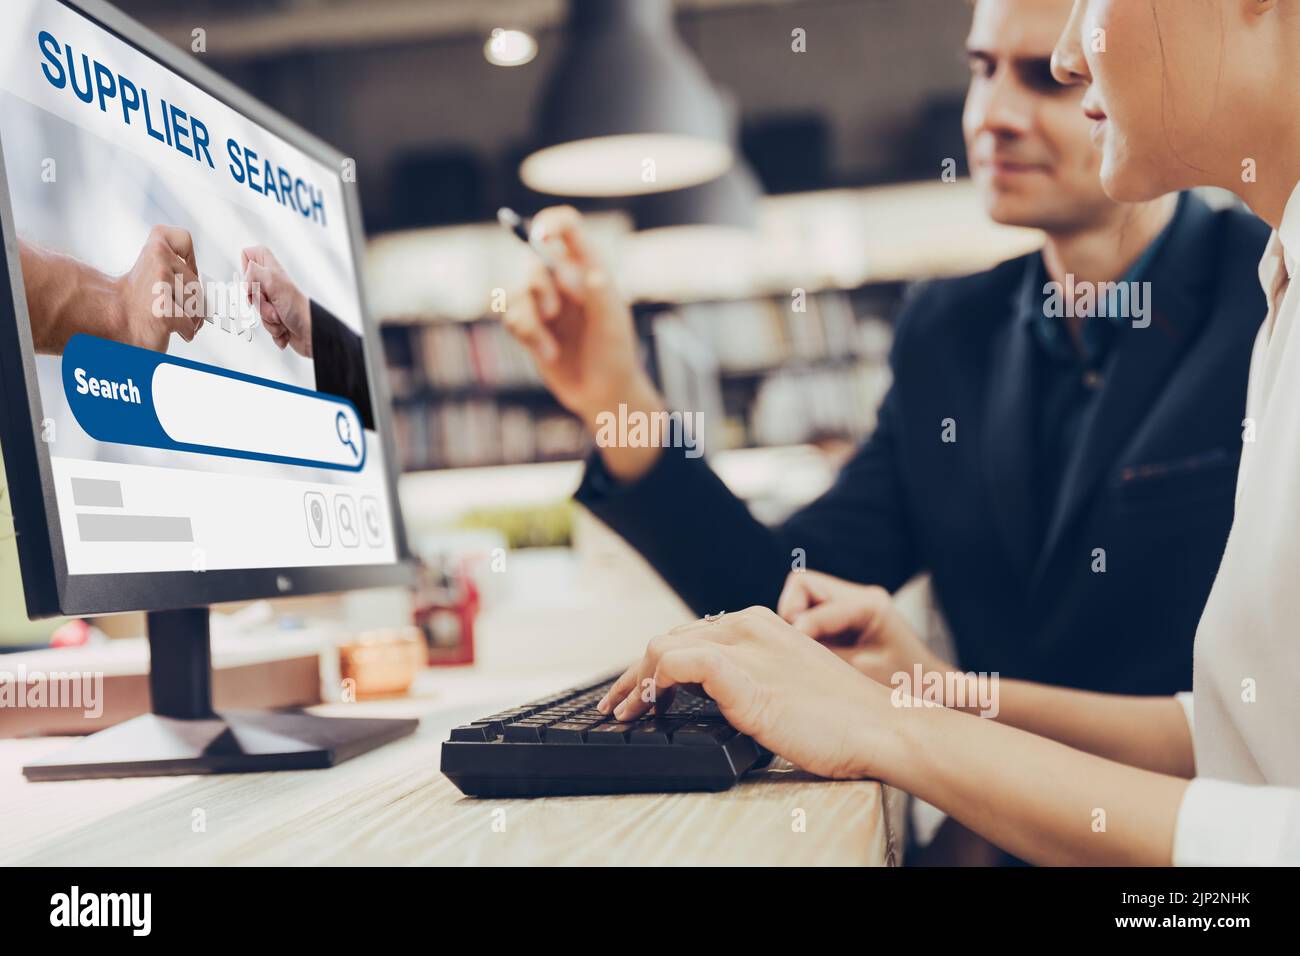 Business Supplier Search concept. teamwork people working in office for searching supply chain partner. Stock Photo